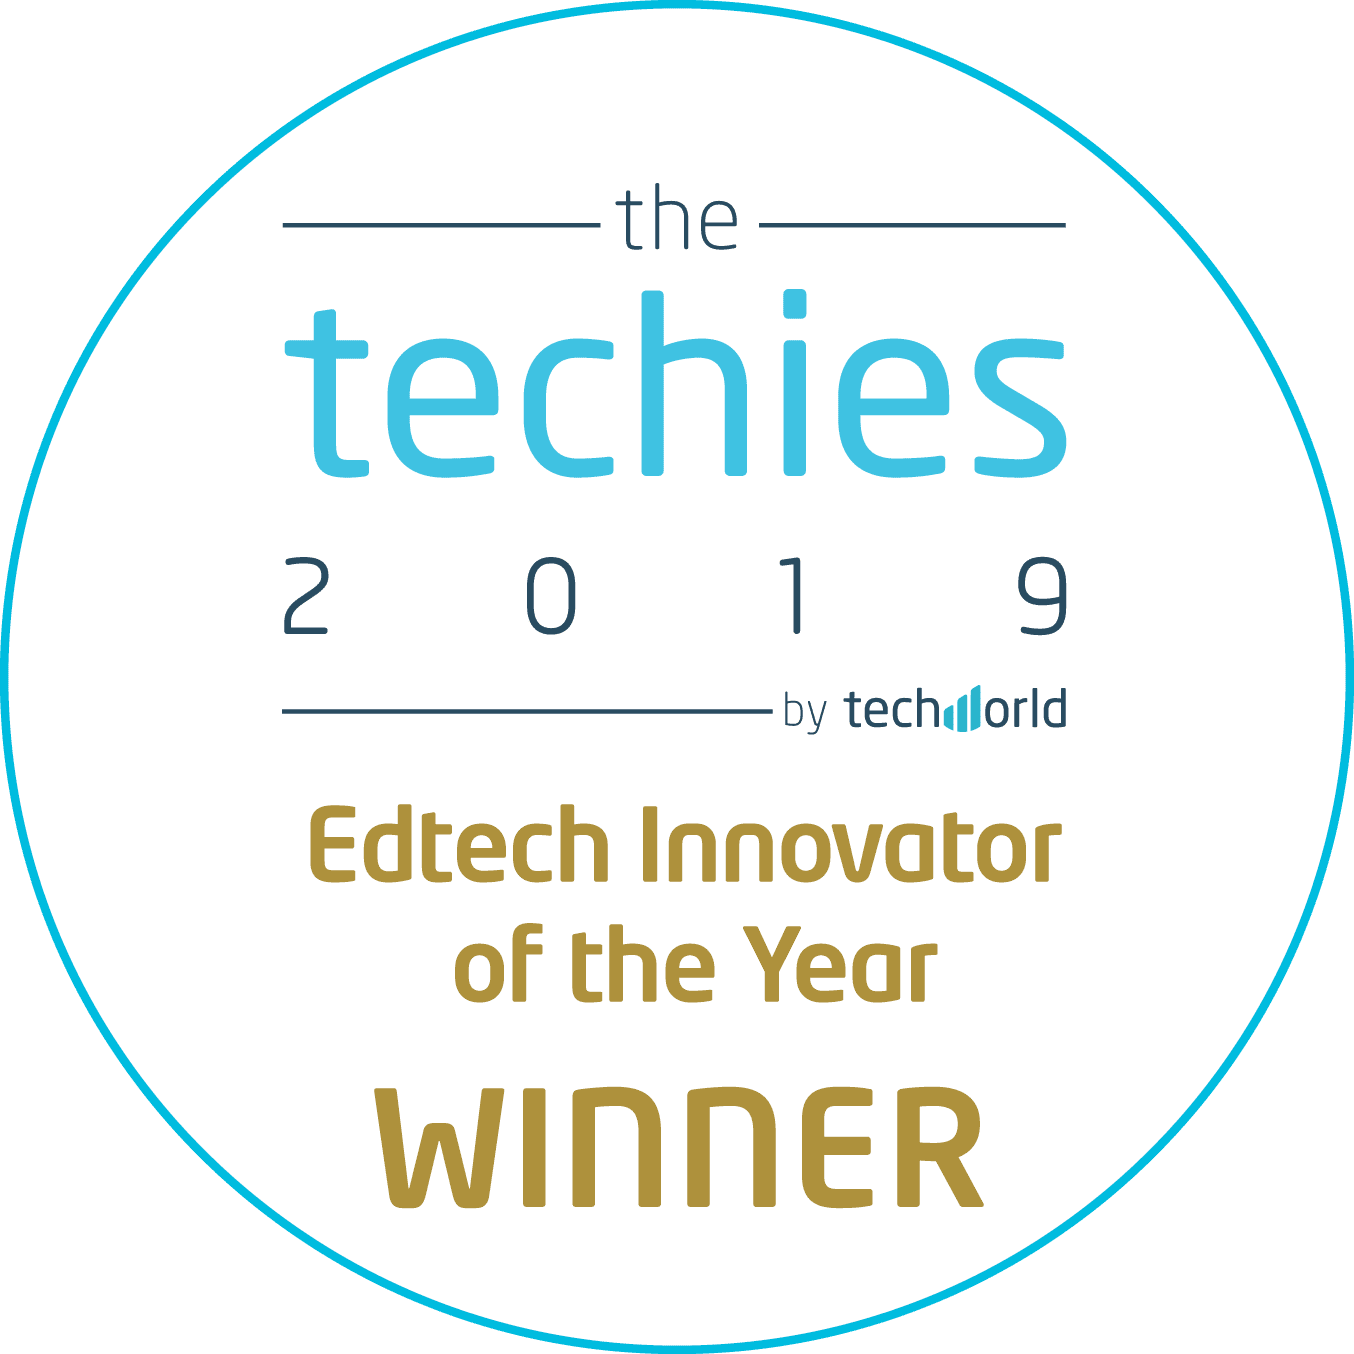 The Techies Awards Logo showcasing Satchel as winners in the Edtech Innovator if the YEar cateogry in 2019 